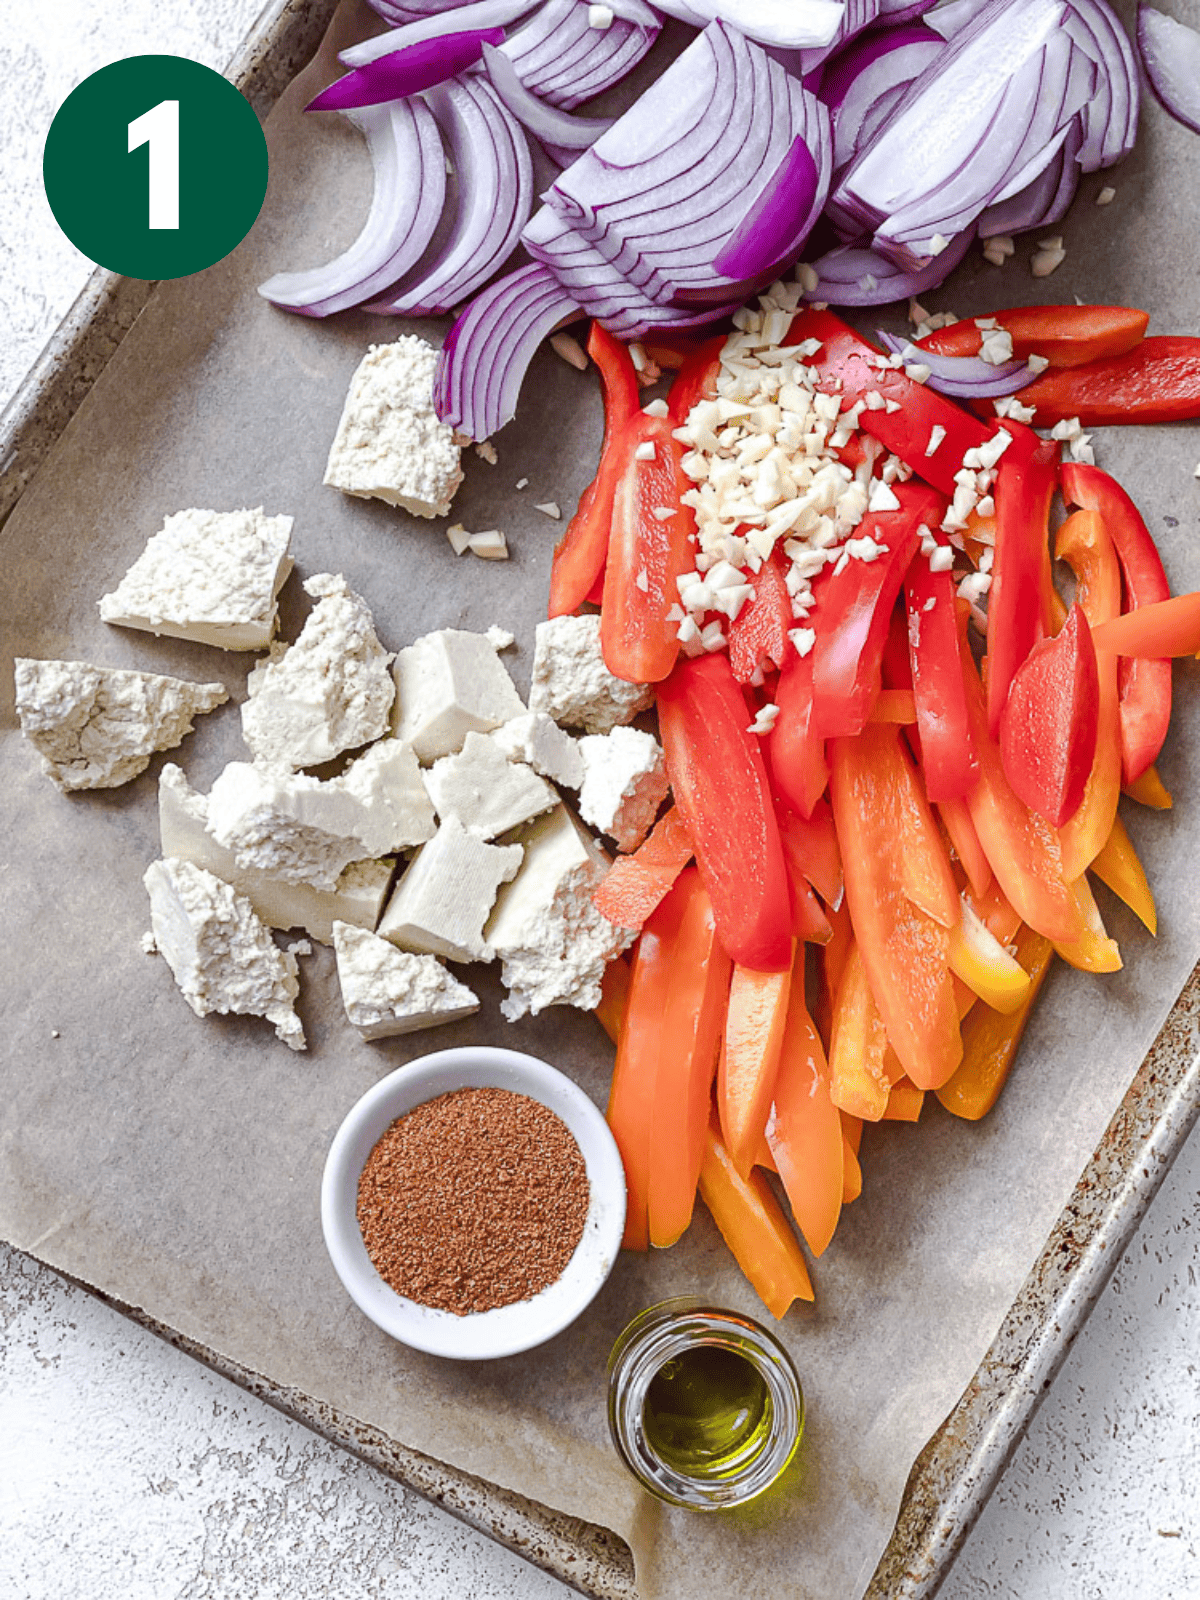 ingredients for tofu fajitas on a parchment-lined baking sheet.